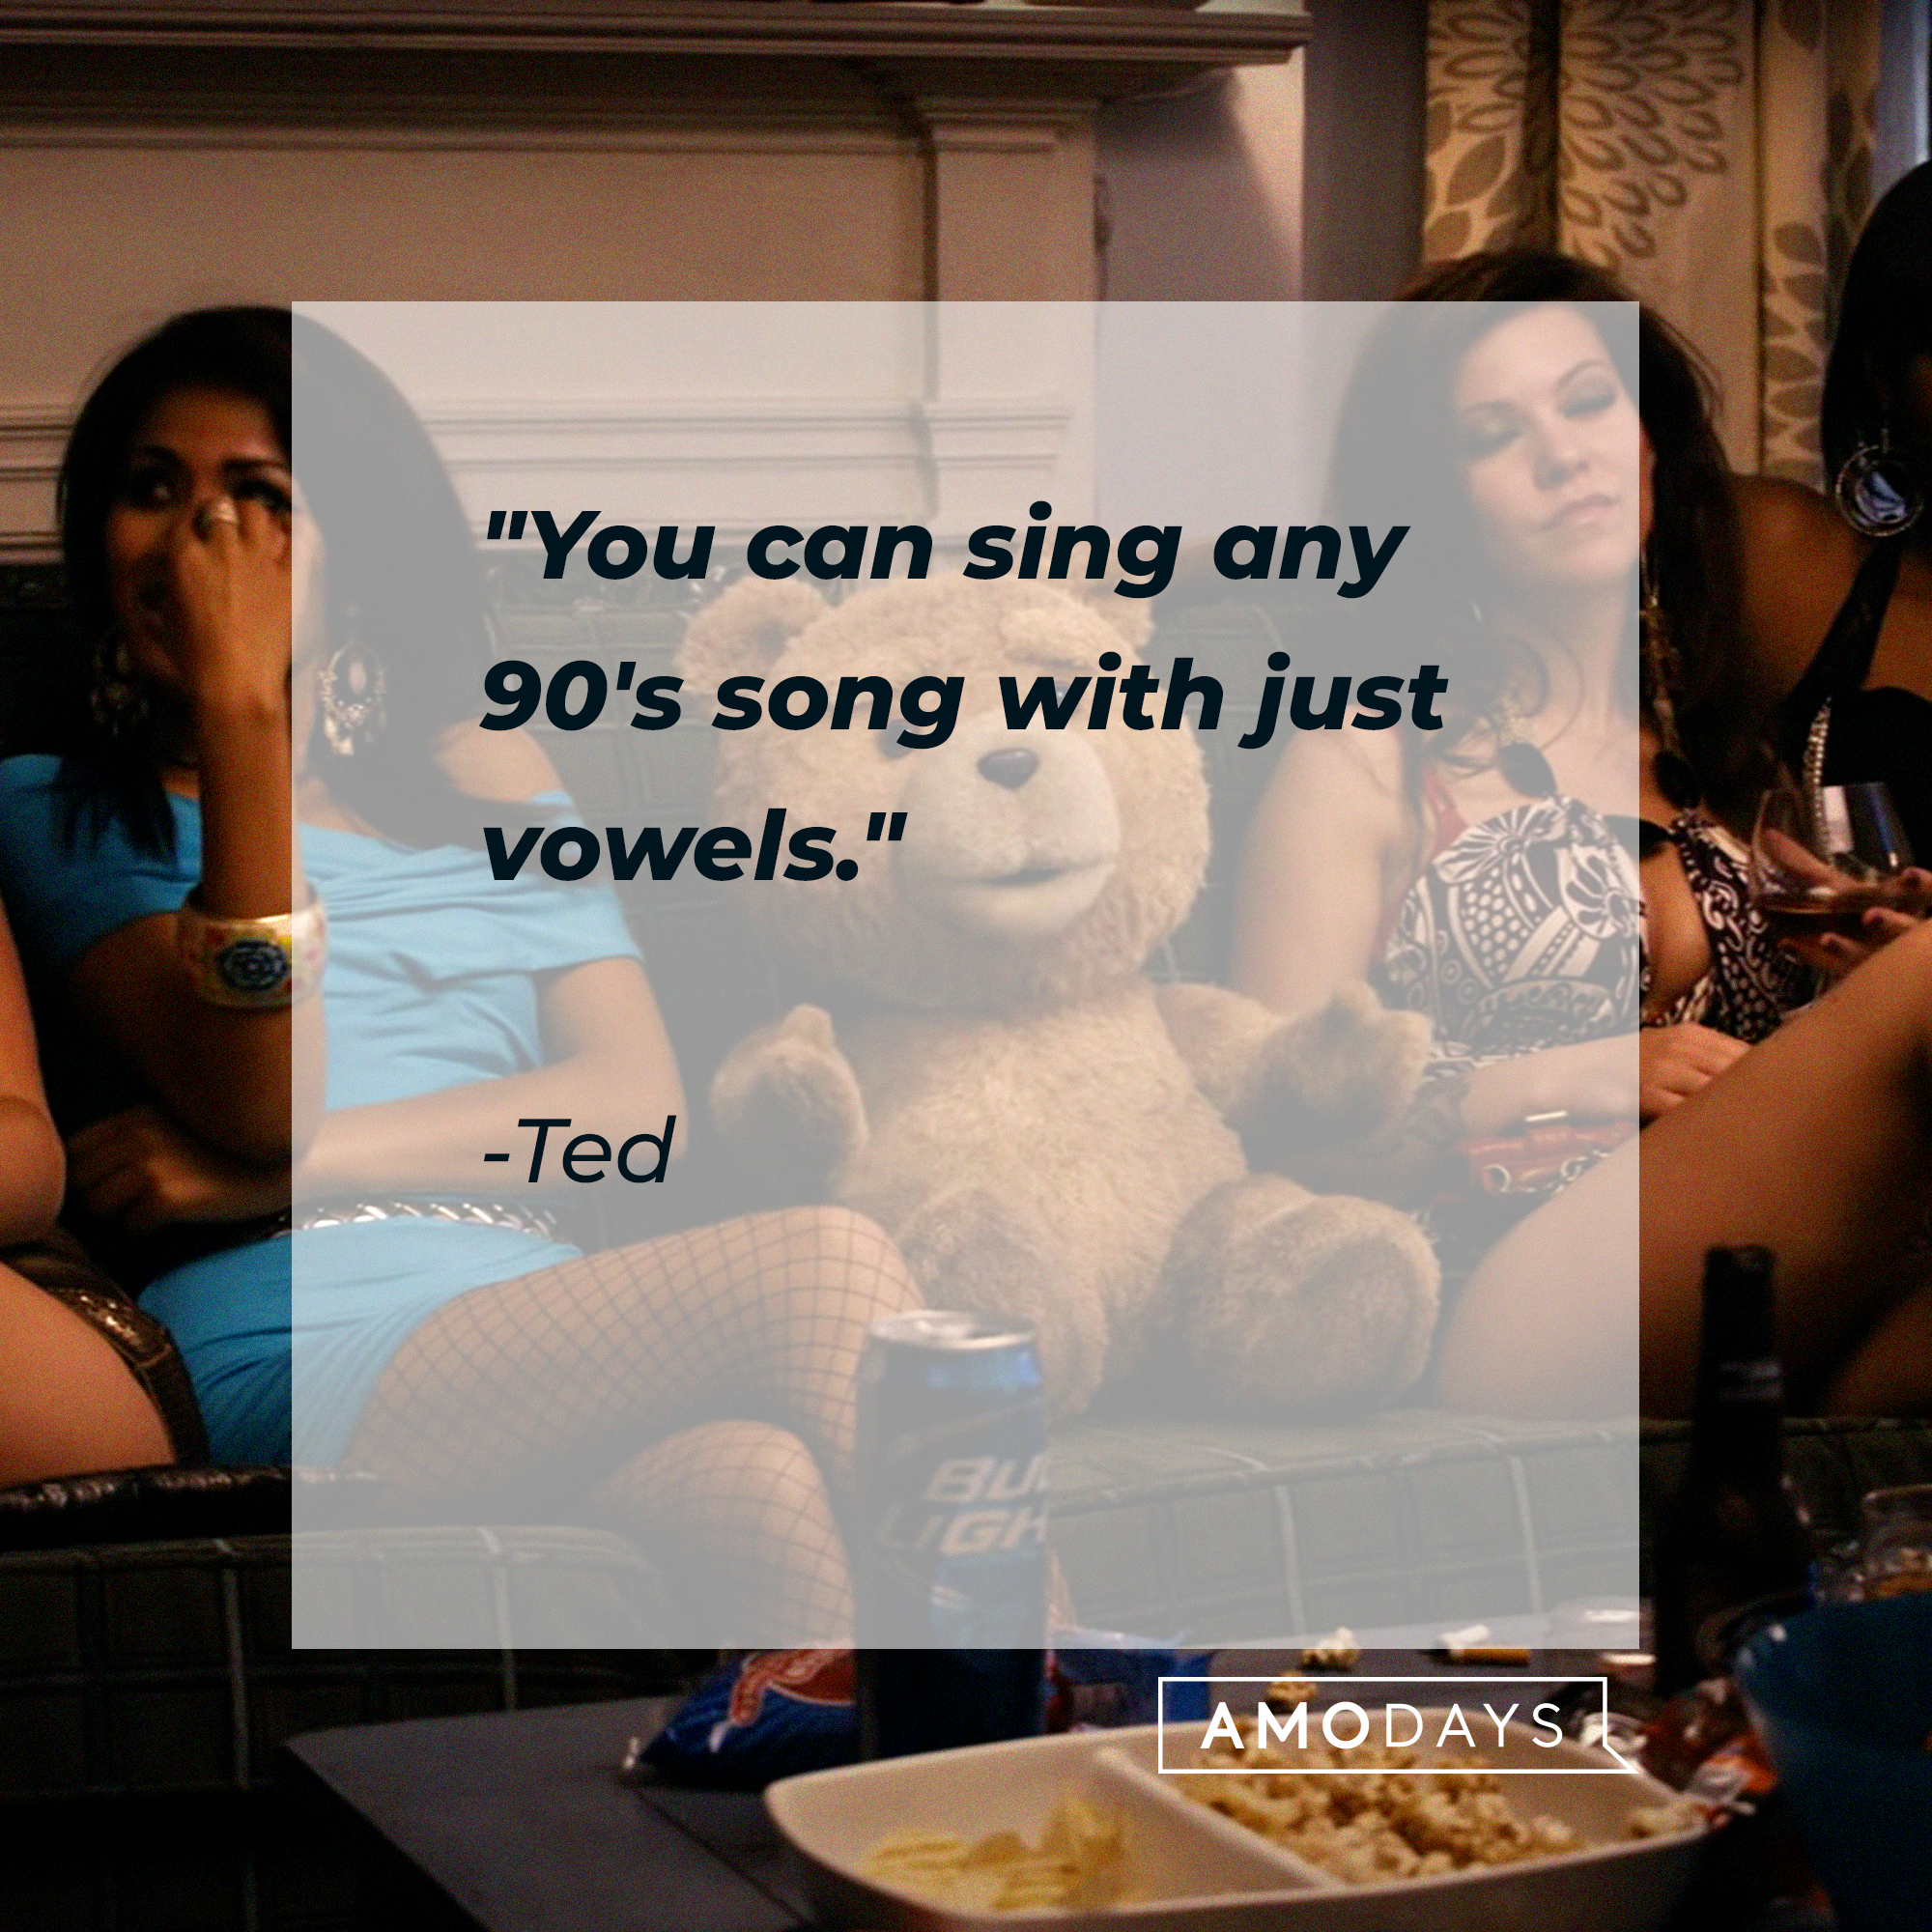 Ted's quote: "You can sing any 90's song with just vowels." | Source: facebook.com/tedisreal